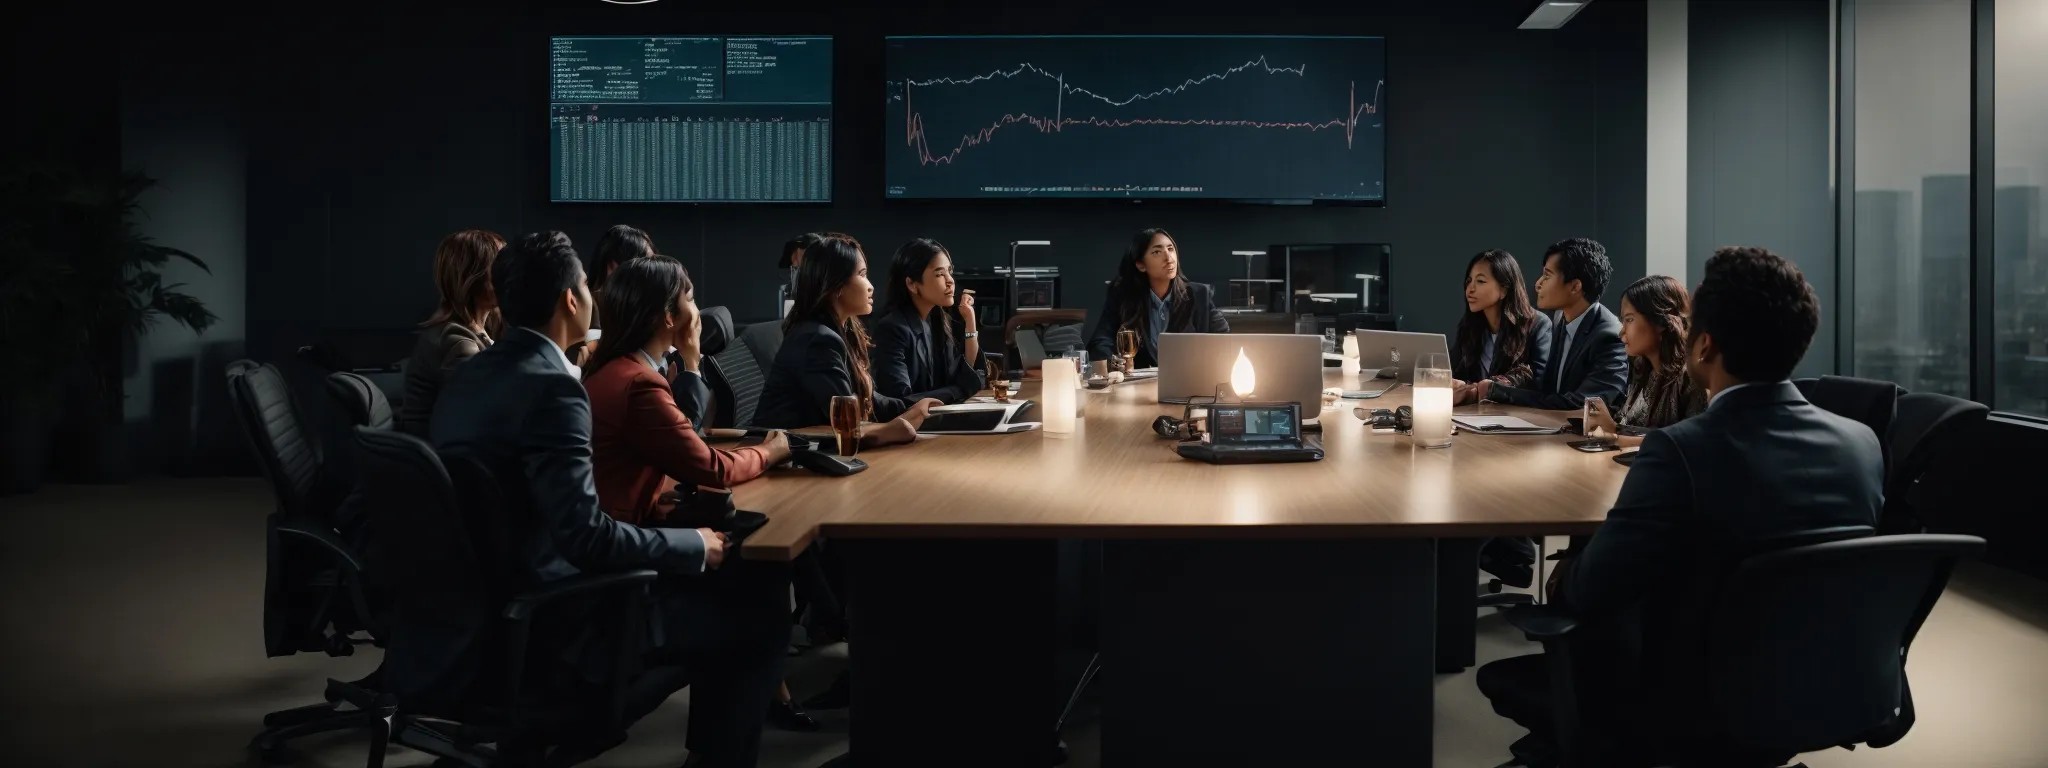 a team of professionals celebrate around a conference table with a glowing computer screen displaying graphs that trend upward.